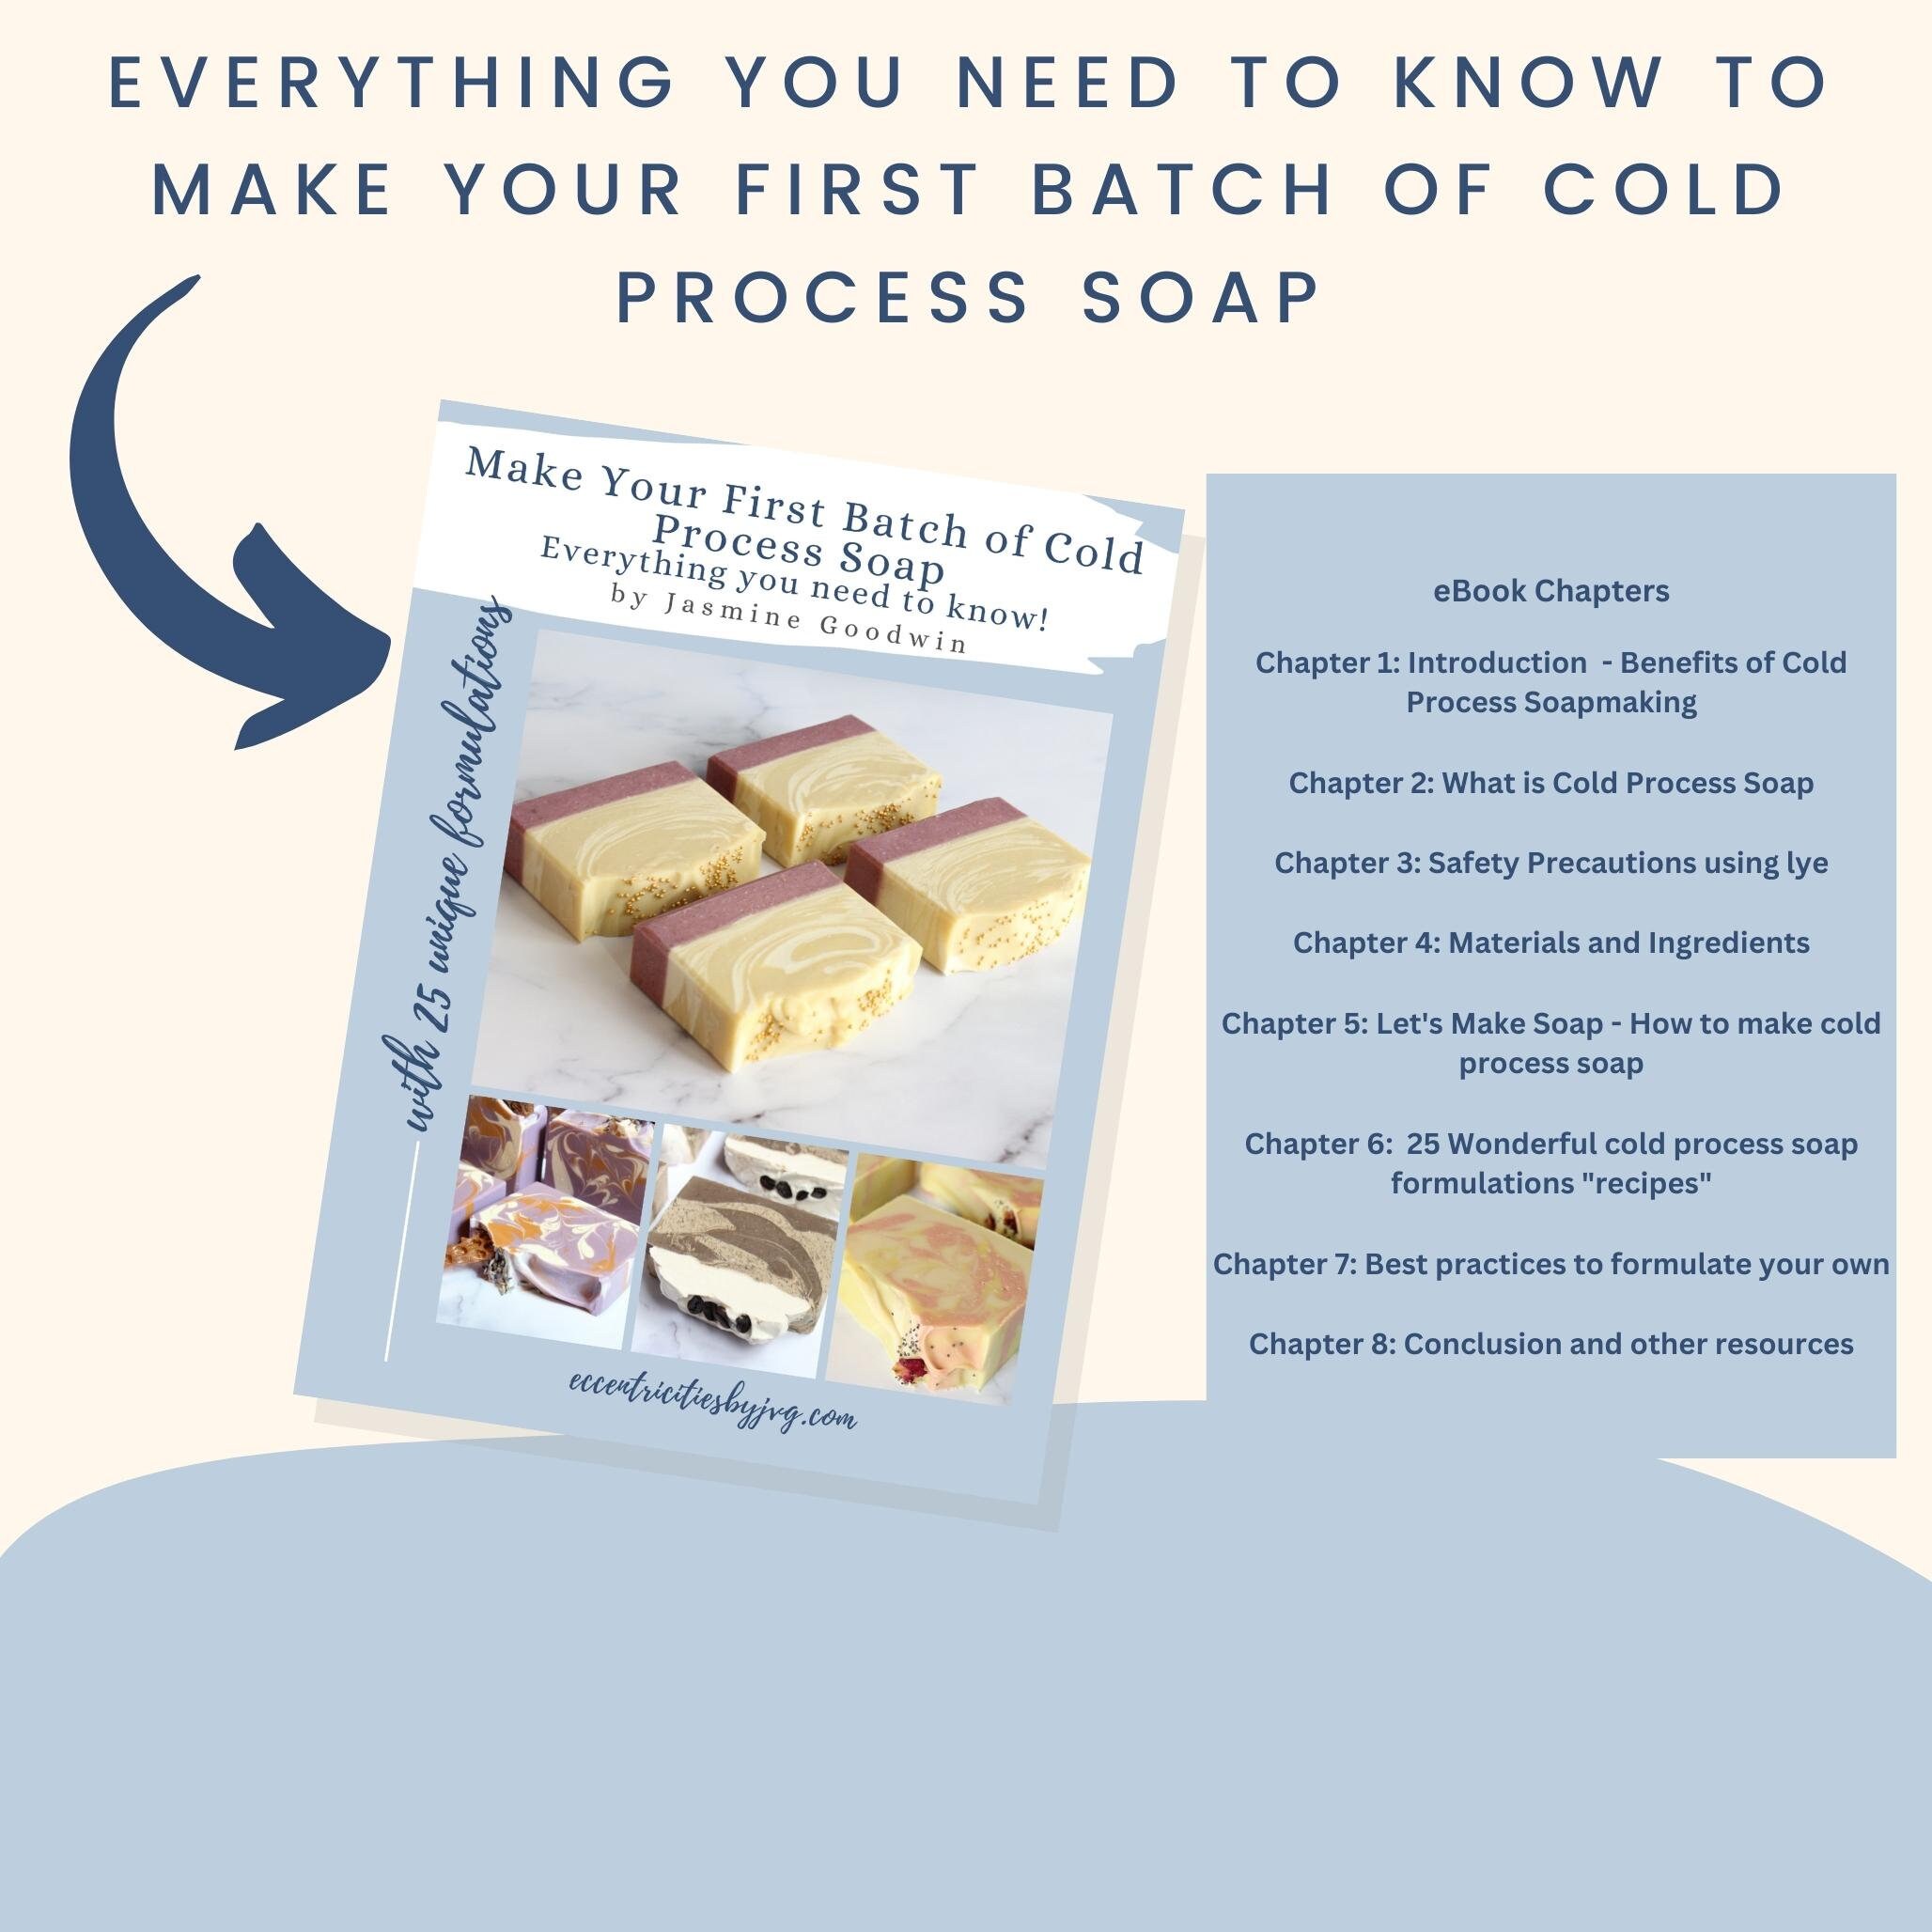 Why Should You Make Your Own Soap? An Overview of Cold Process